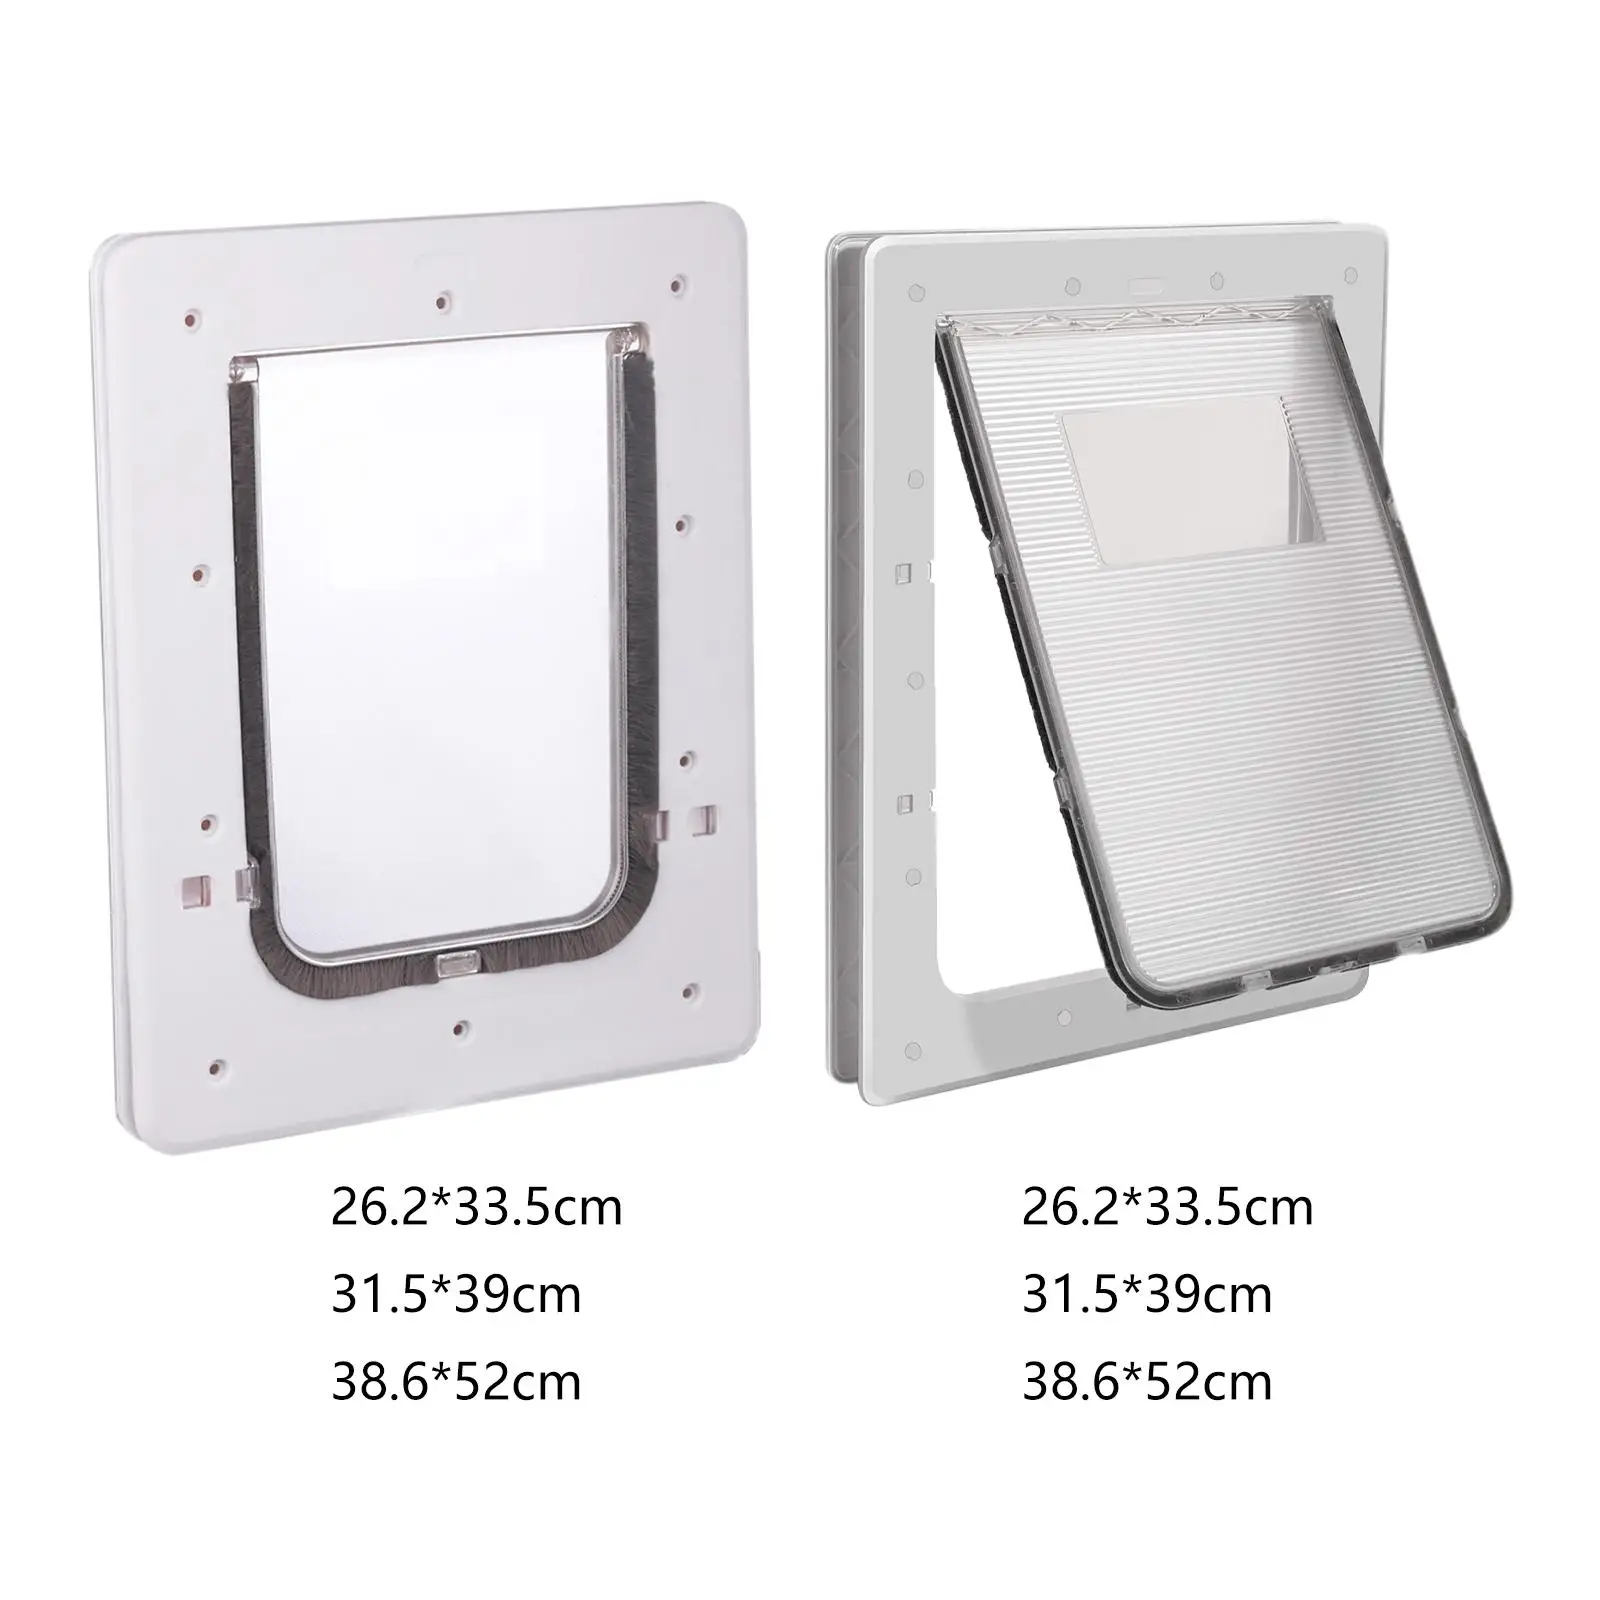 2 Way Dogs Door Flap Mount Secure Cats Pet Supplies Large Frame Durable